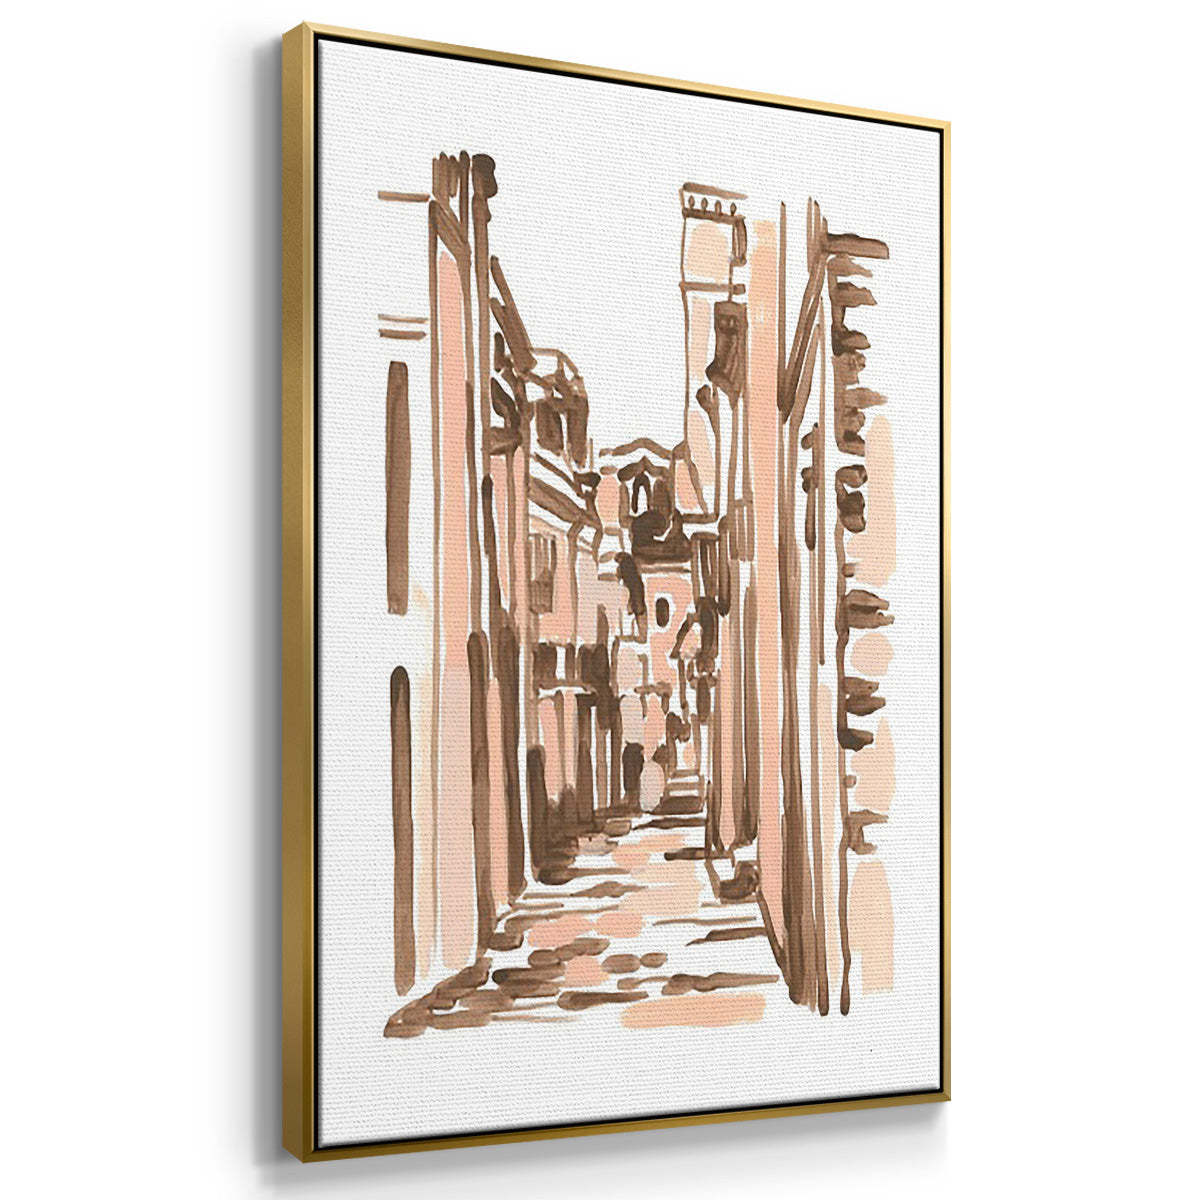 Blush Architecture Study IV - Framed Premium Gallery Wrapped Canvas L Frame 3 Piece Set - Ready to Hang